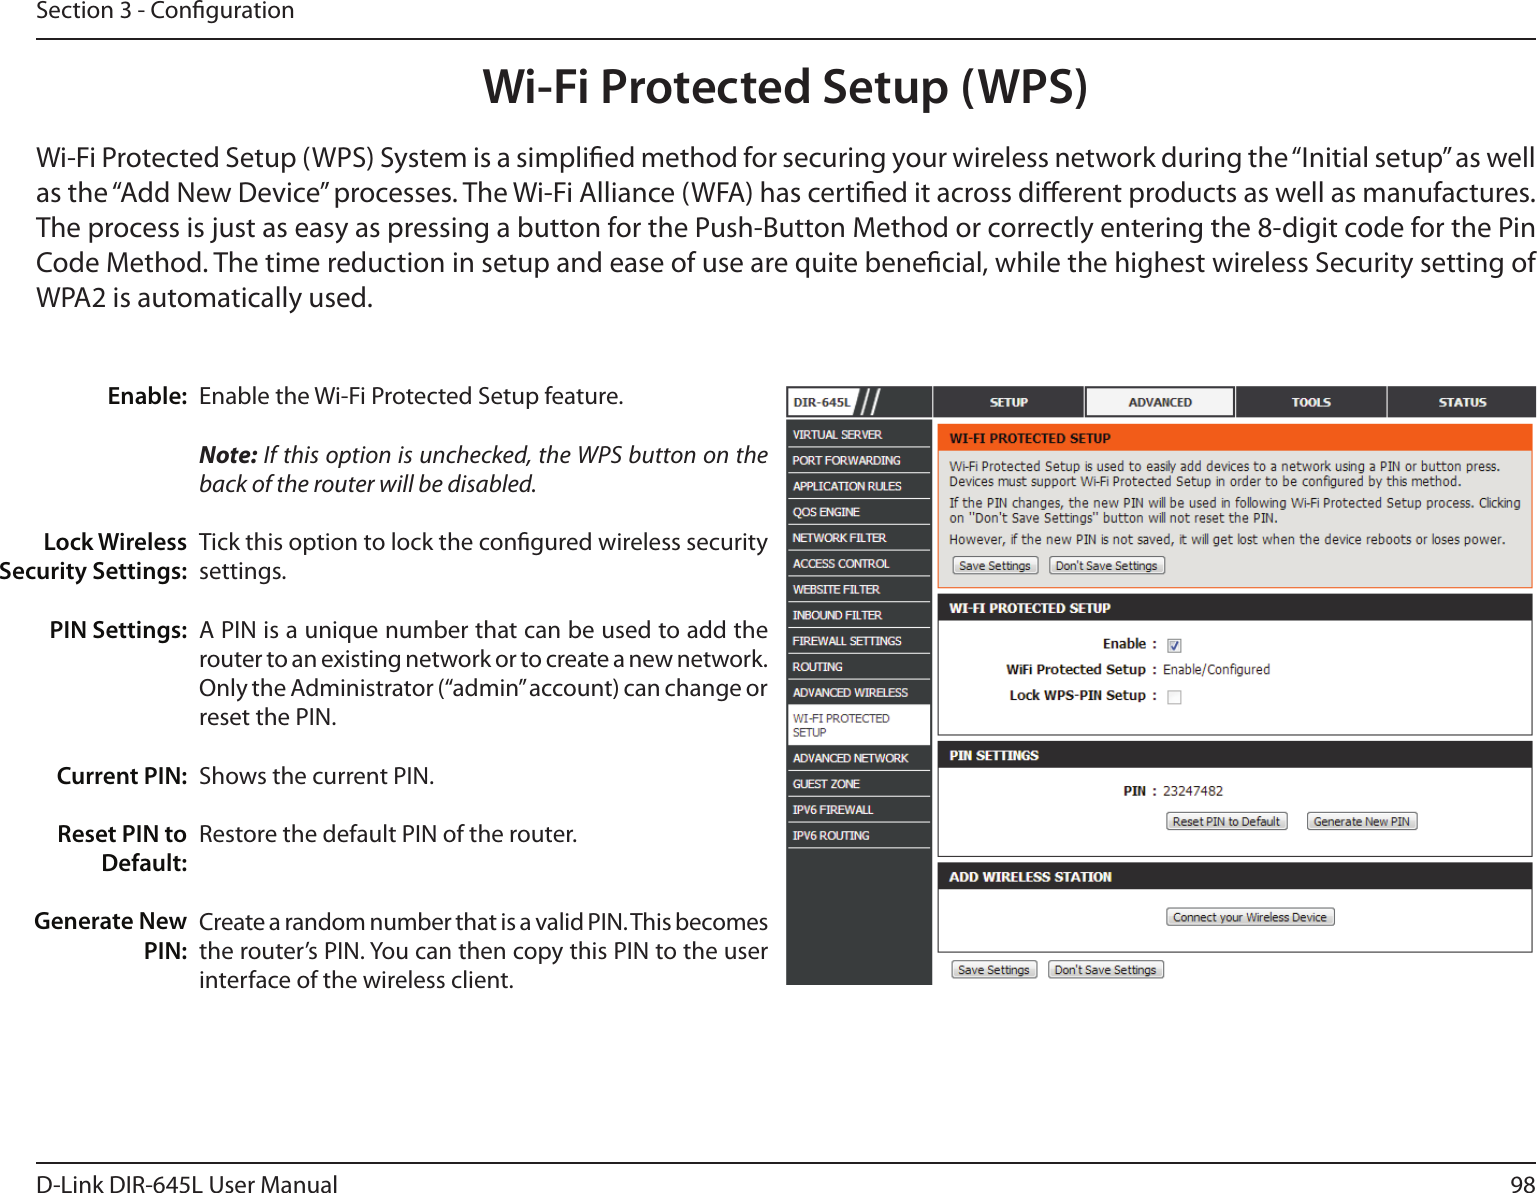 98D-Link DIR-645L User ManualSection 3 - CongurationWi-Fi Protected Setup (WPS)Enable the Wi-Fi Protected Setup feature. Note: If this option is unchecked, the WPS button on the back of the router will be disabled.Tick this option to lock the congured wireless security settings.A PIN is a unique number that can be used to add the router to an existing network or to create a new network. Only the Administrator (“admin” account) can change or reset the PIN. Shows the current PIN. Restore the default PIN of the router. Create a random number that is a valid PIN. This becomes the router’s PIN. You can then copy this PIN to the user interface of the wireless client.Enable:Lock Wireless Security Settings:PIN Settings:Current PIN:Reset PIN to Default:Generate New PIN:Wi-Fi Protected Setup (WPS) System is a simplied method for securing your wireless network during the “Initial setup” as well as the “Add New Device” processes. The Wi-Fi Alliance (WFA) has certied it across dierent products as well as manufactures. The process is just as easy as pressing a button for the Push-Button Method or correctly entering the 8-digit code for the Pin Code Method. The time reduction in setup and ease of use are quite benecial, while the highest wireless Security setting of WPA2 is automatically used.